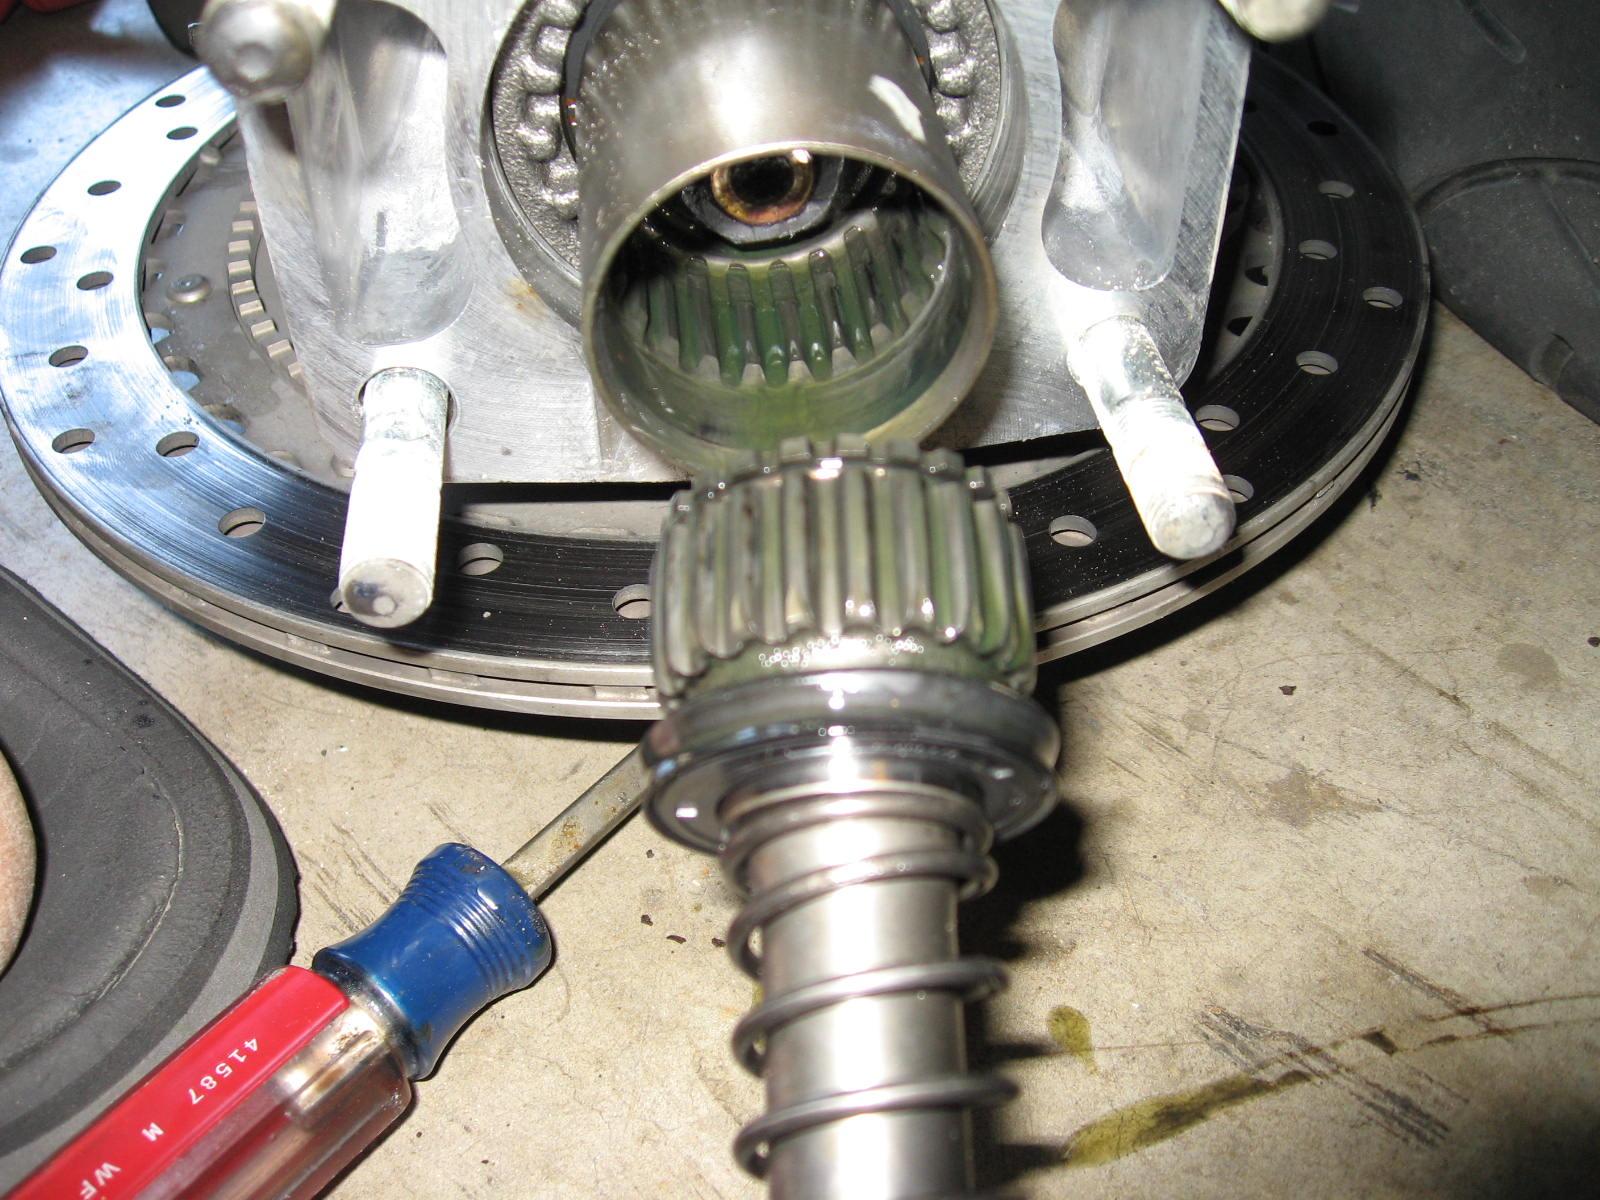 Input shaft simply pulls out, with seal. You really should replace the seal if you do this. Dont remove unless you need to.